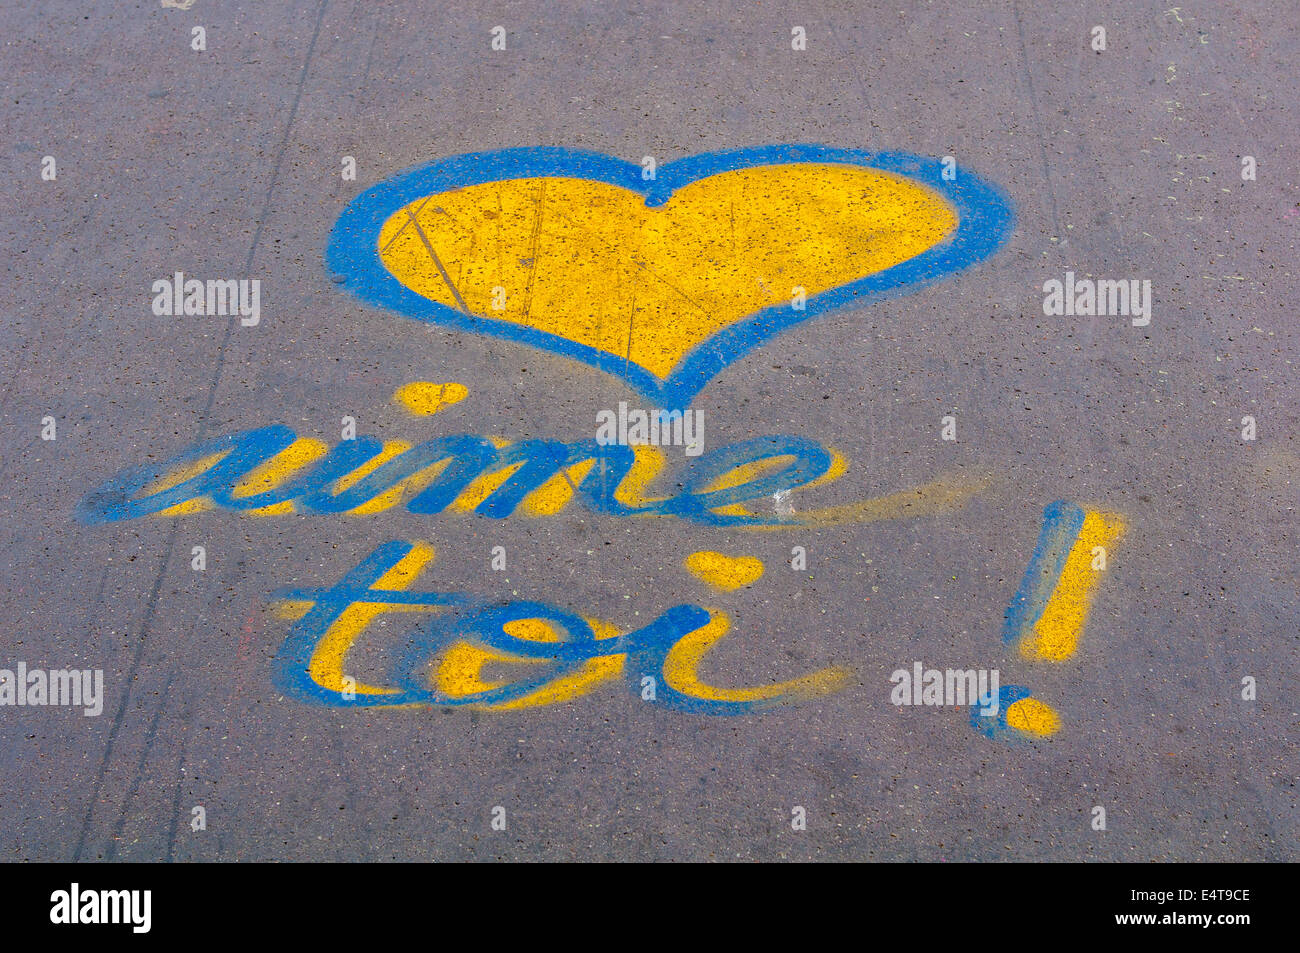 Aime toi! graffiti in blue and yellow found on a street in Paris France Stock Photo